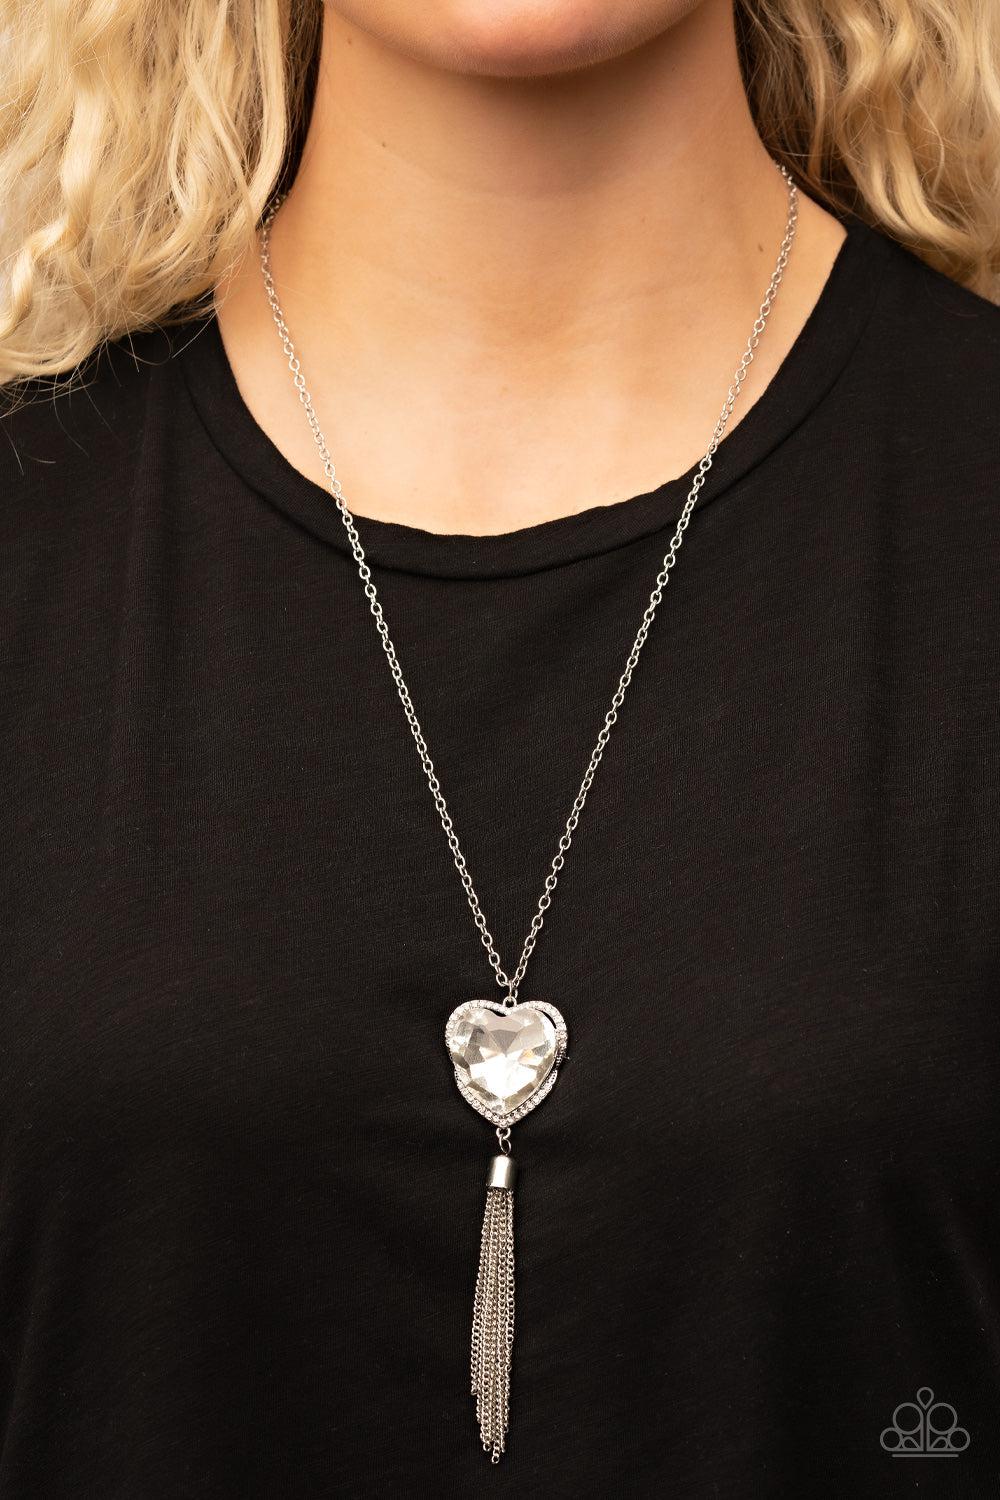 Finding My Forever White Rhinestone Heart Necklace - Paparazzi Accessories- on model - CarasShop.com - $5 Jewelry by Cara Jewels